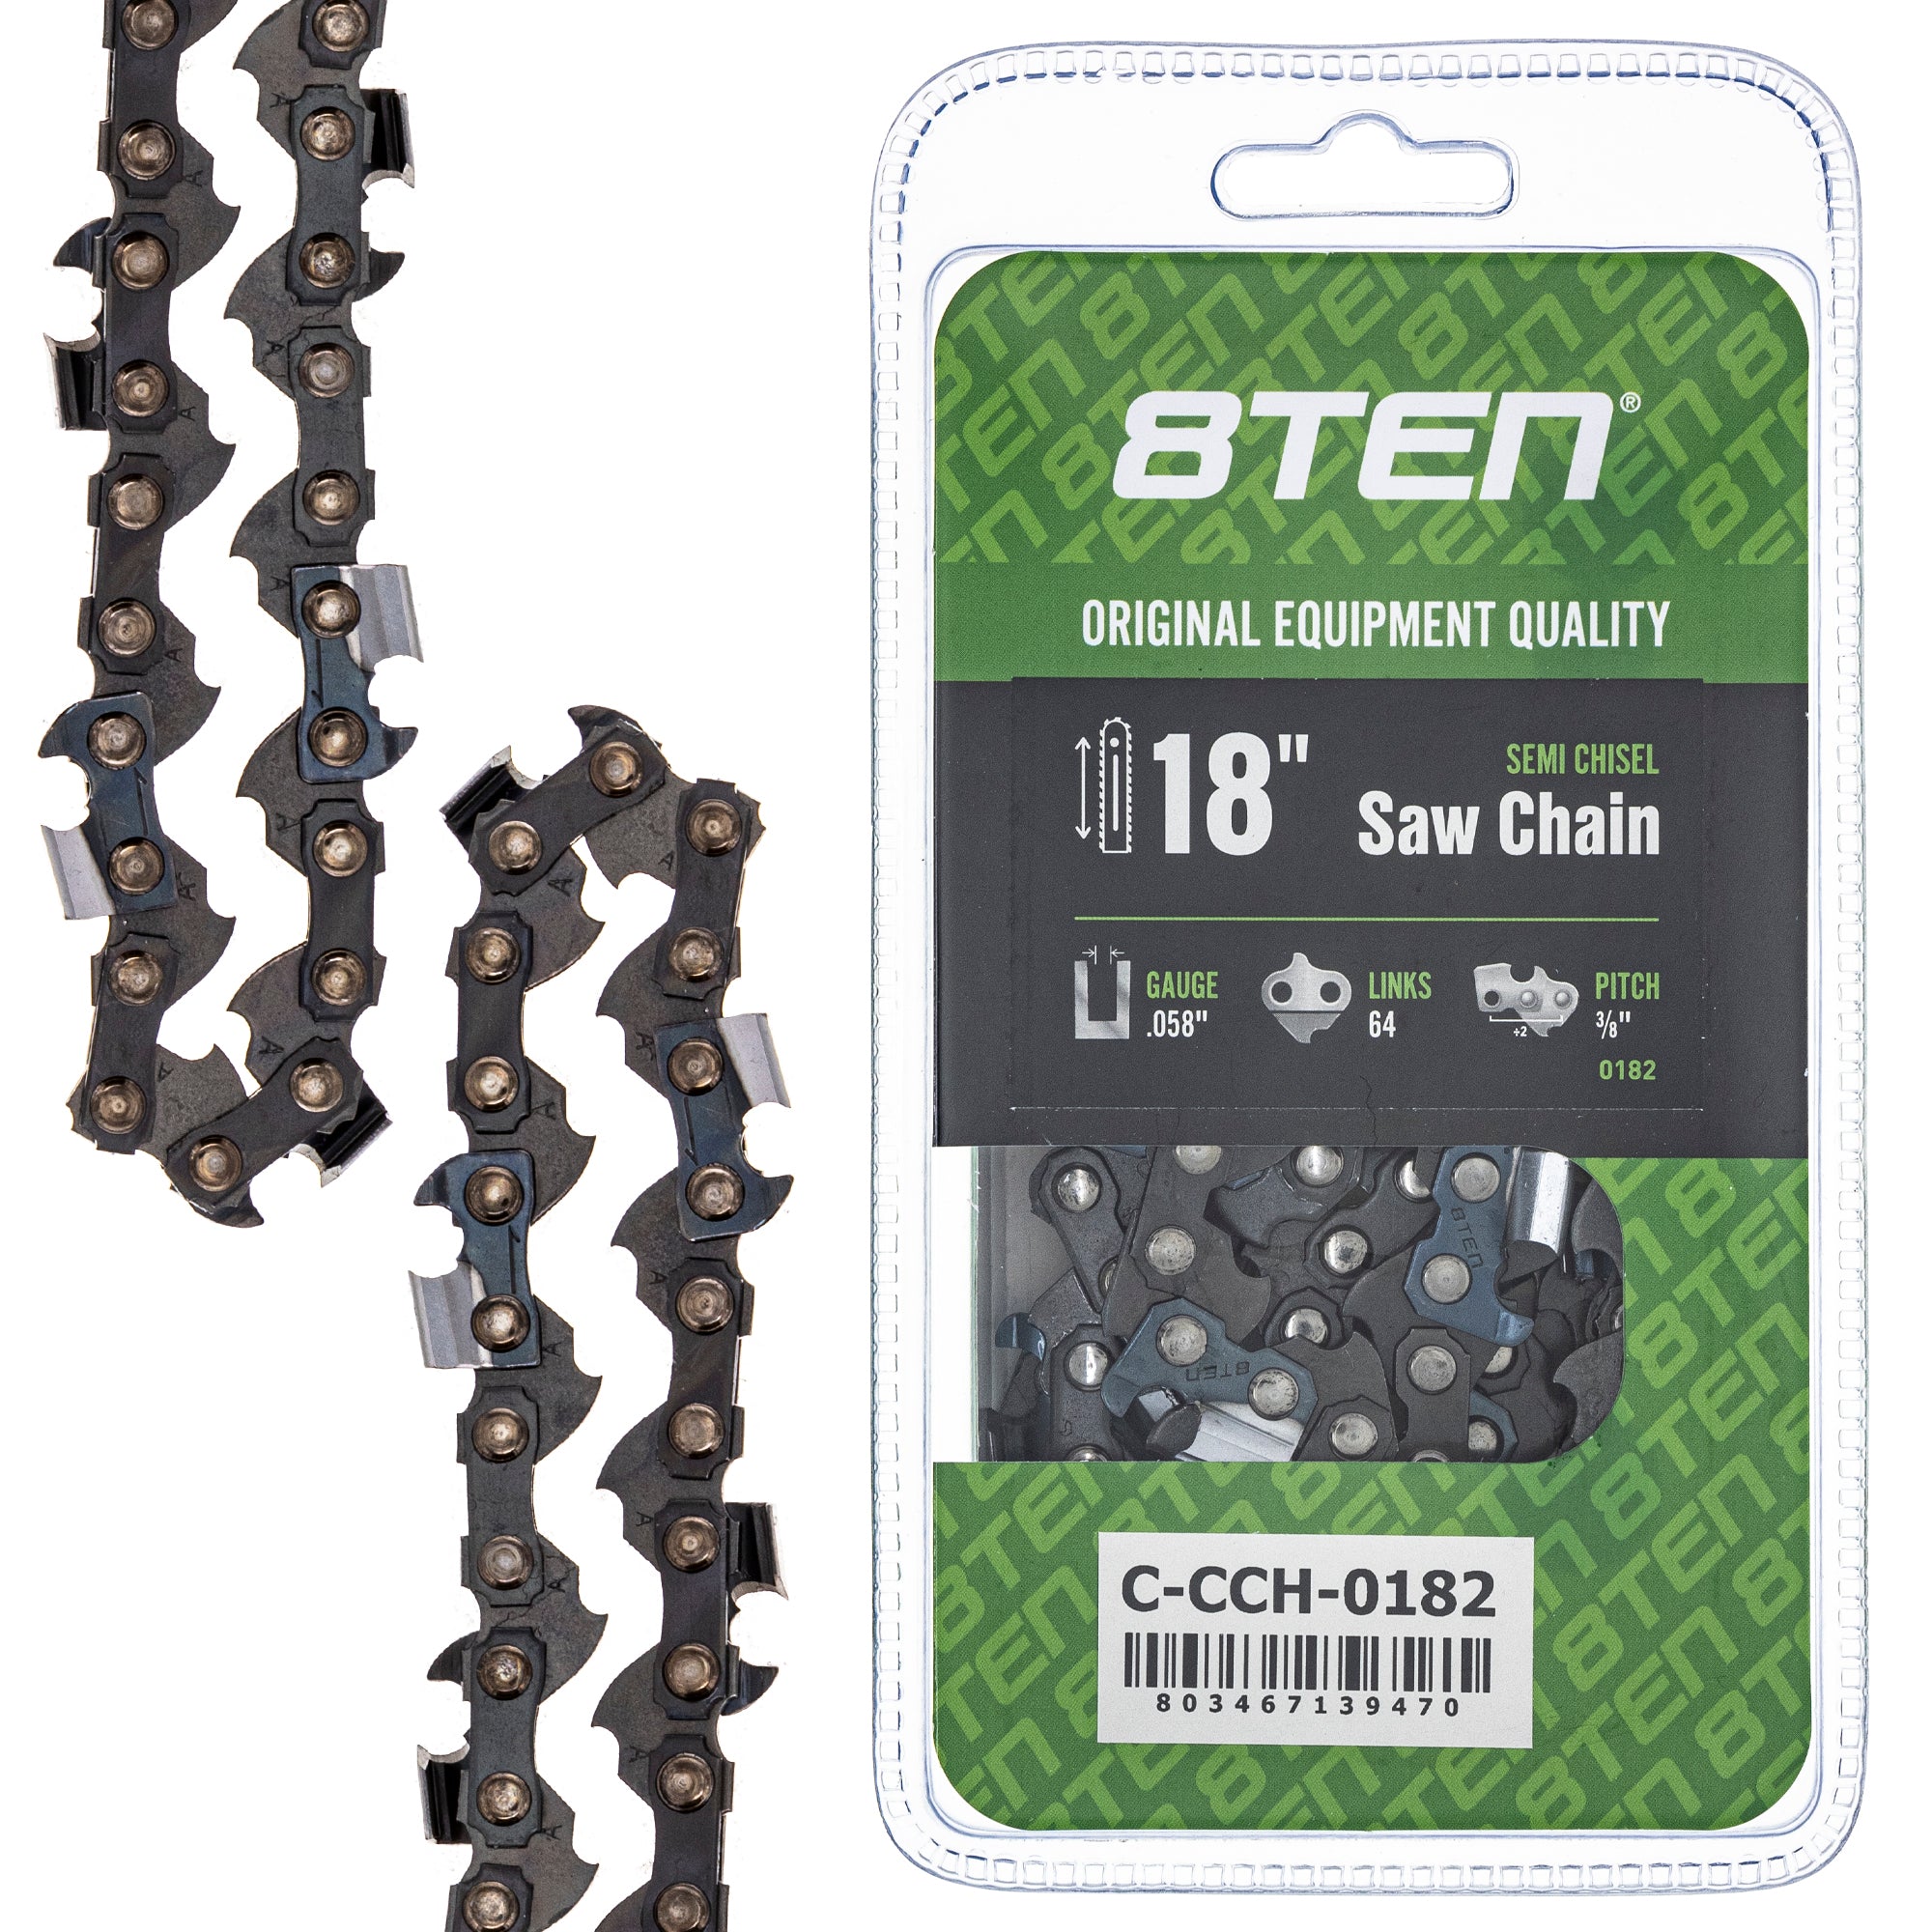 Chainsaw Chain 18 Inch .058 3/8 64DL for zOTHER Oregon DCS431 DCS430 8TEN 810-CCC2304H